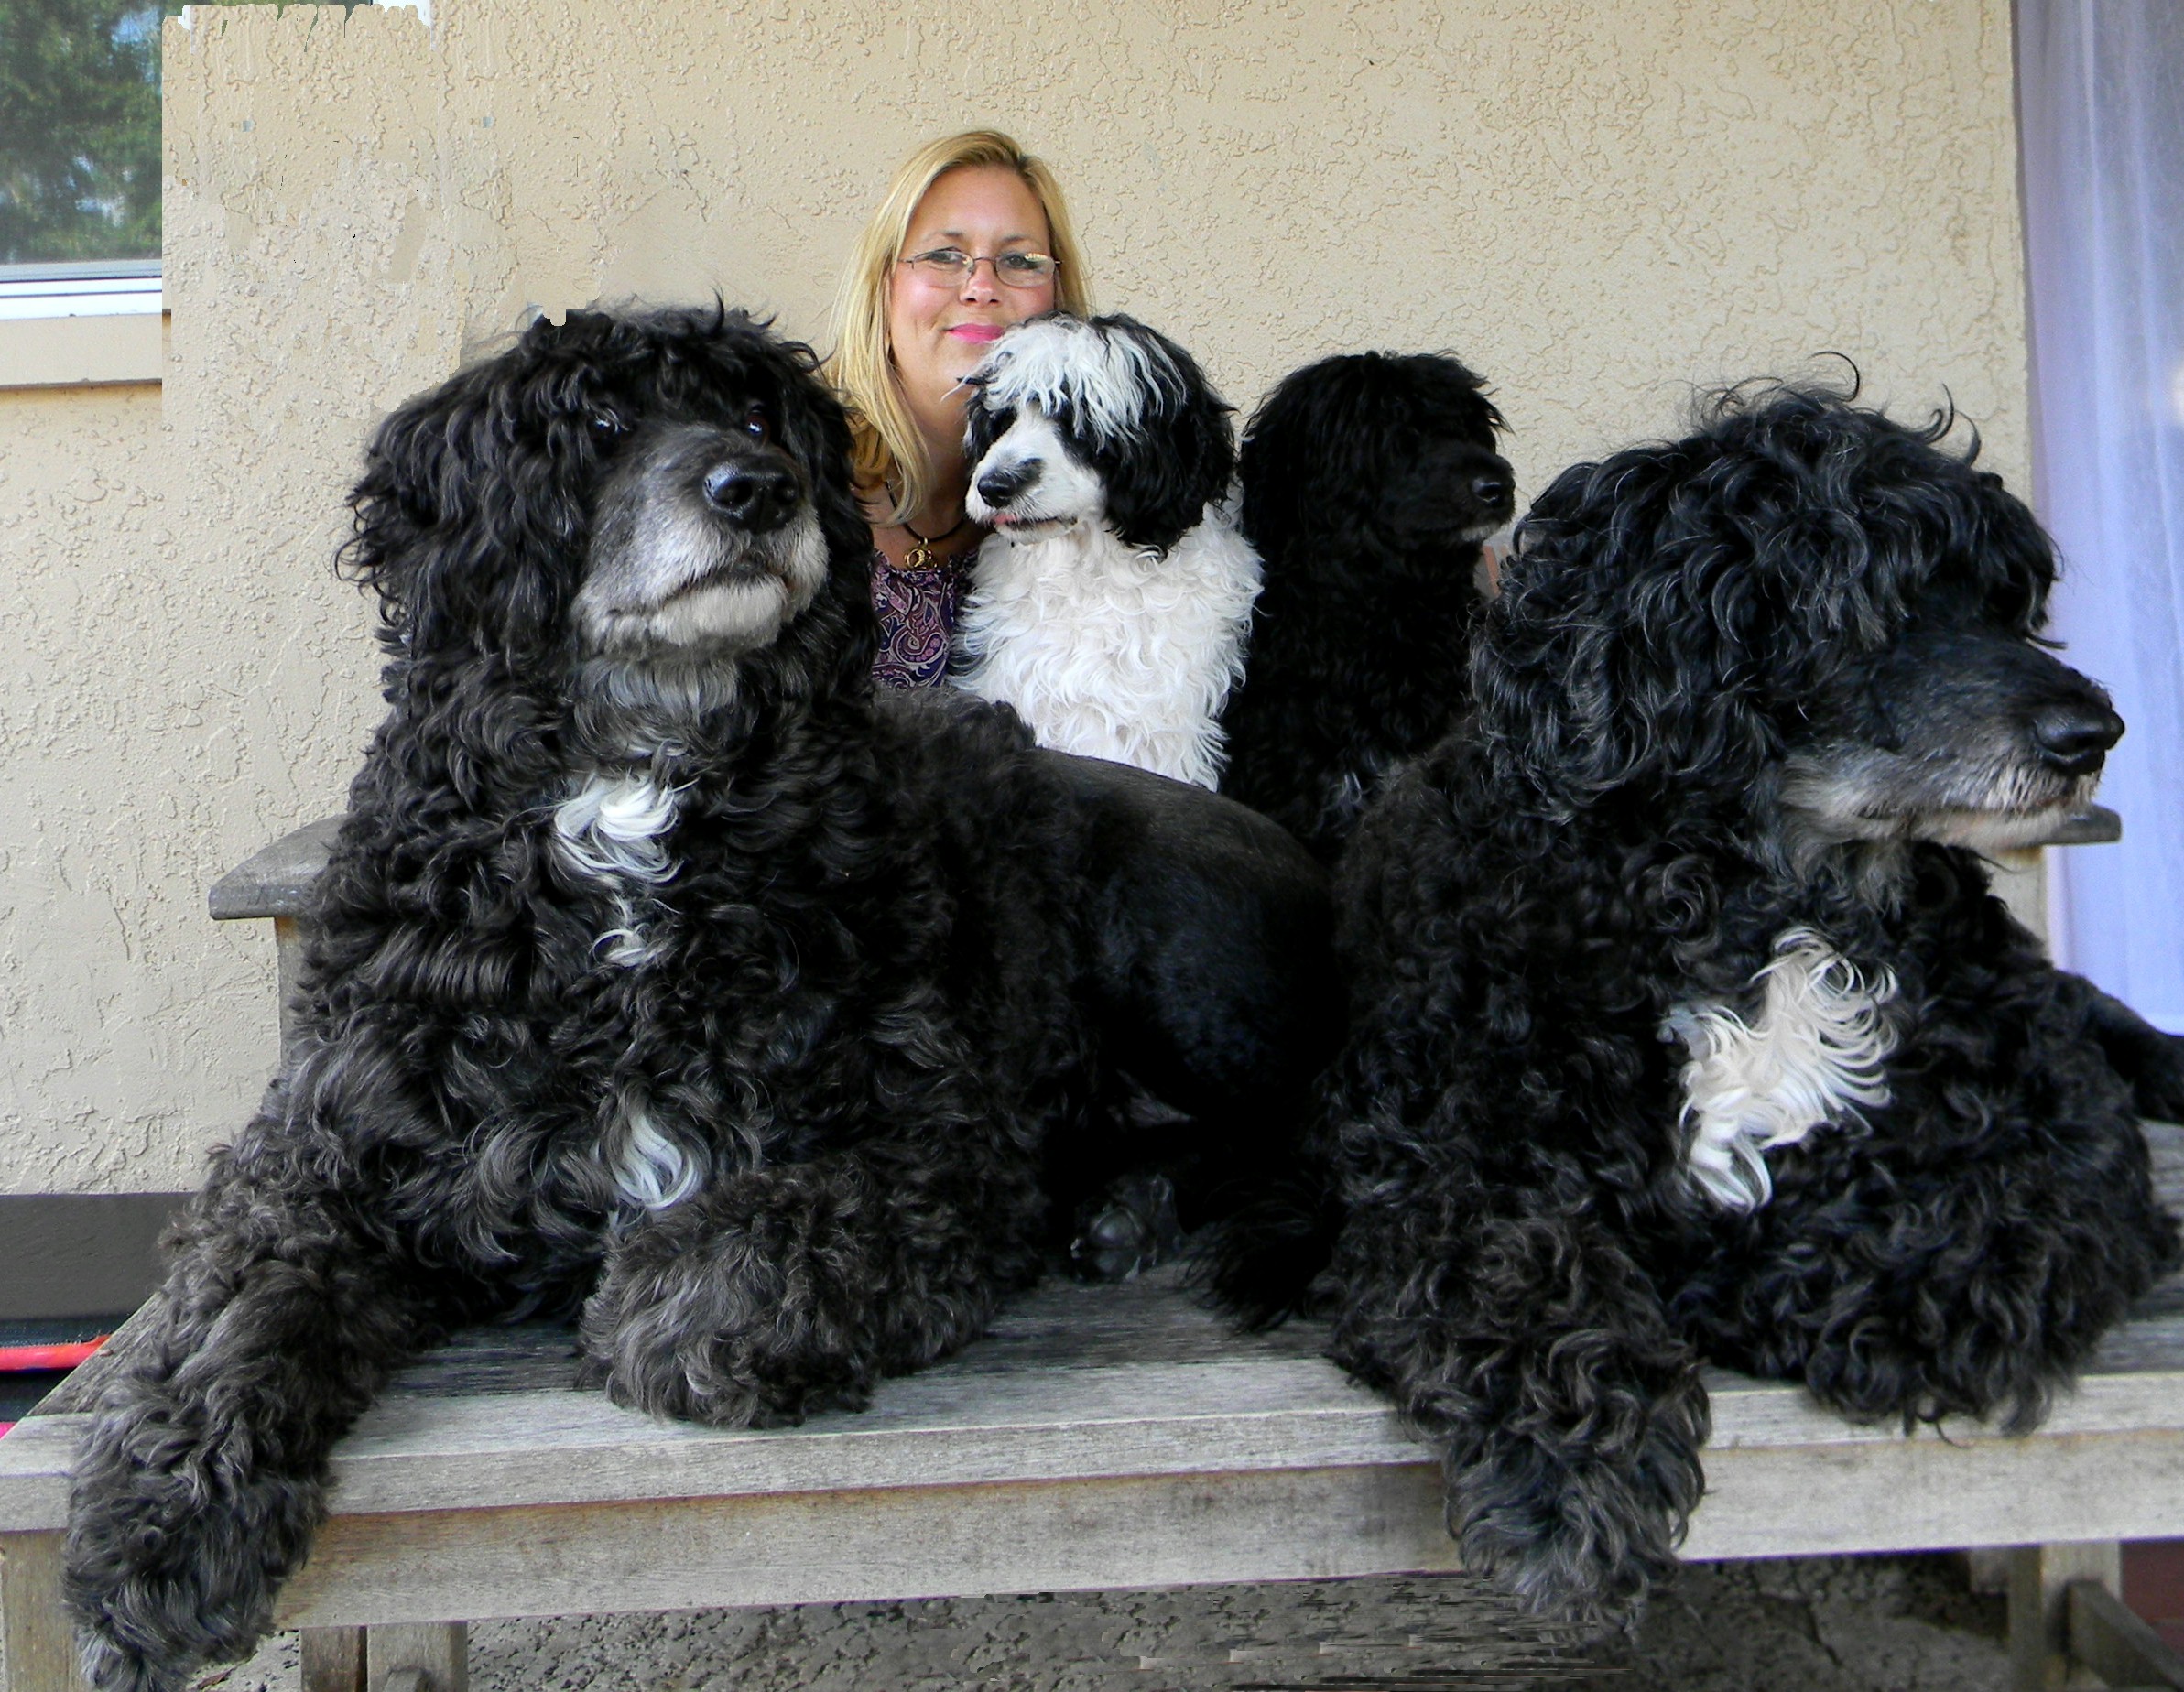 Lisa McClish-Boyles, owner of CPWD, with her dogs